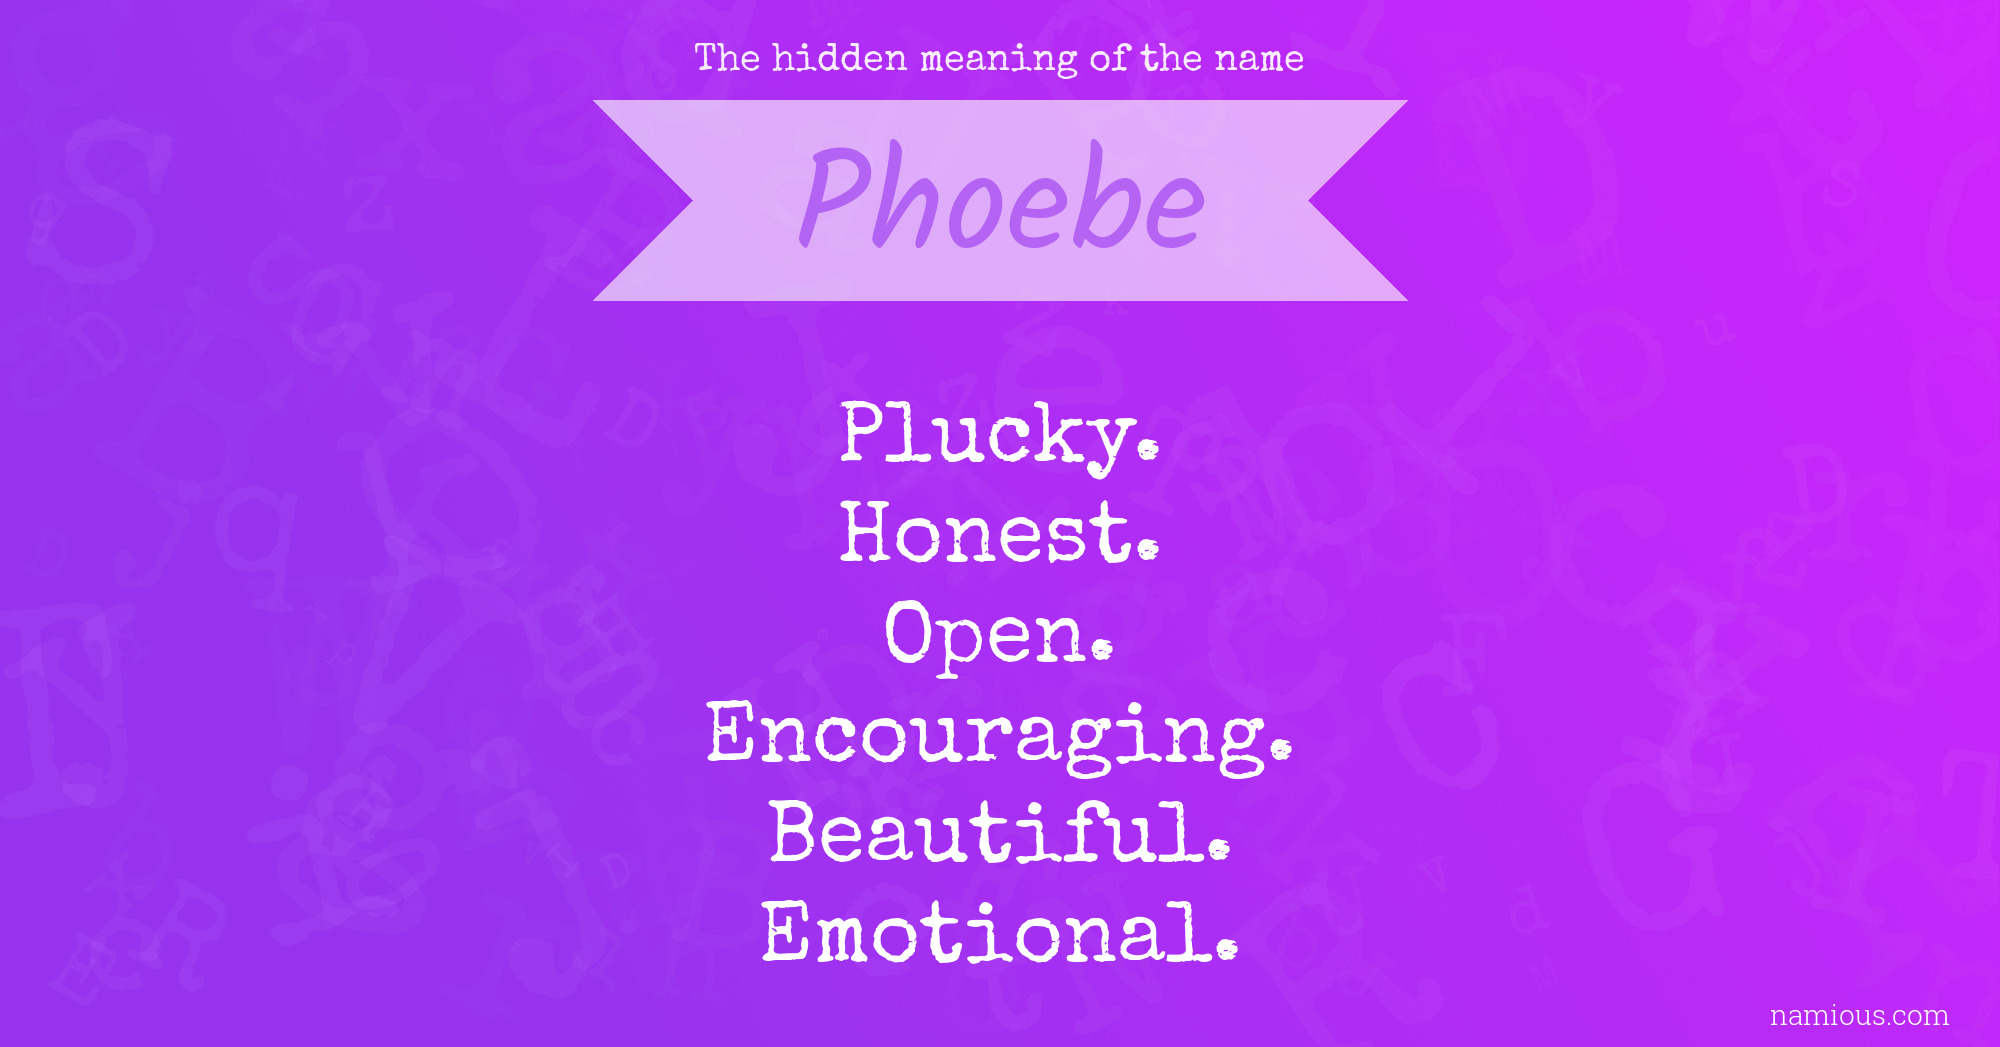 The hidden meaning of the name Phoebe